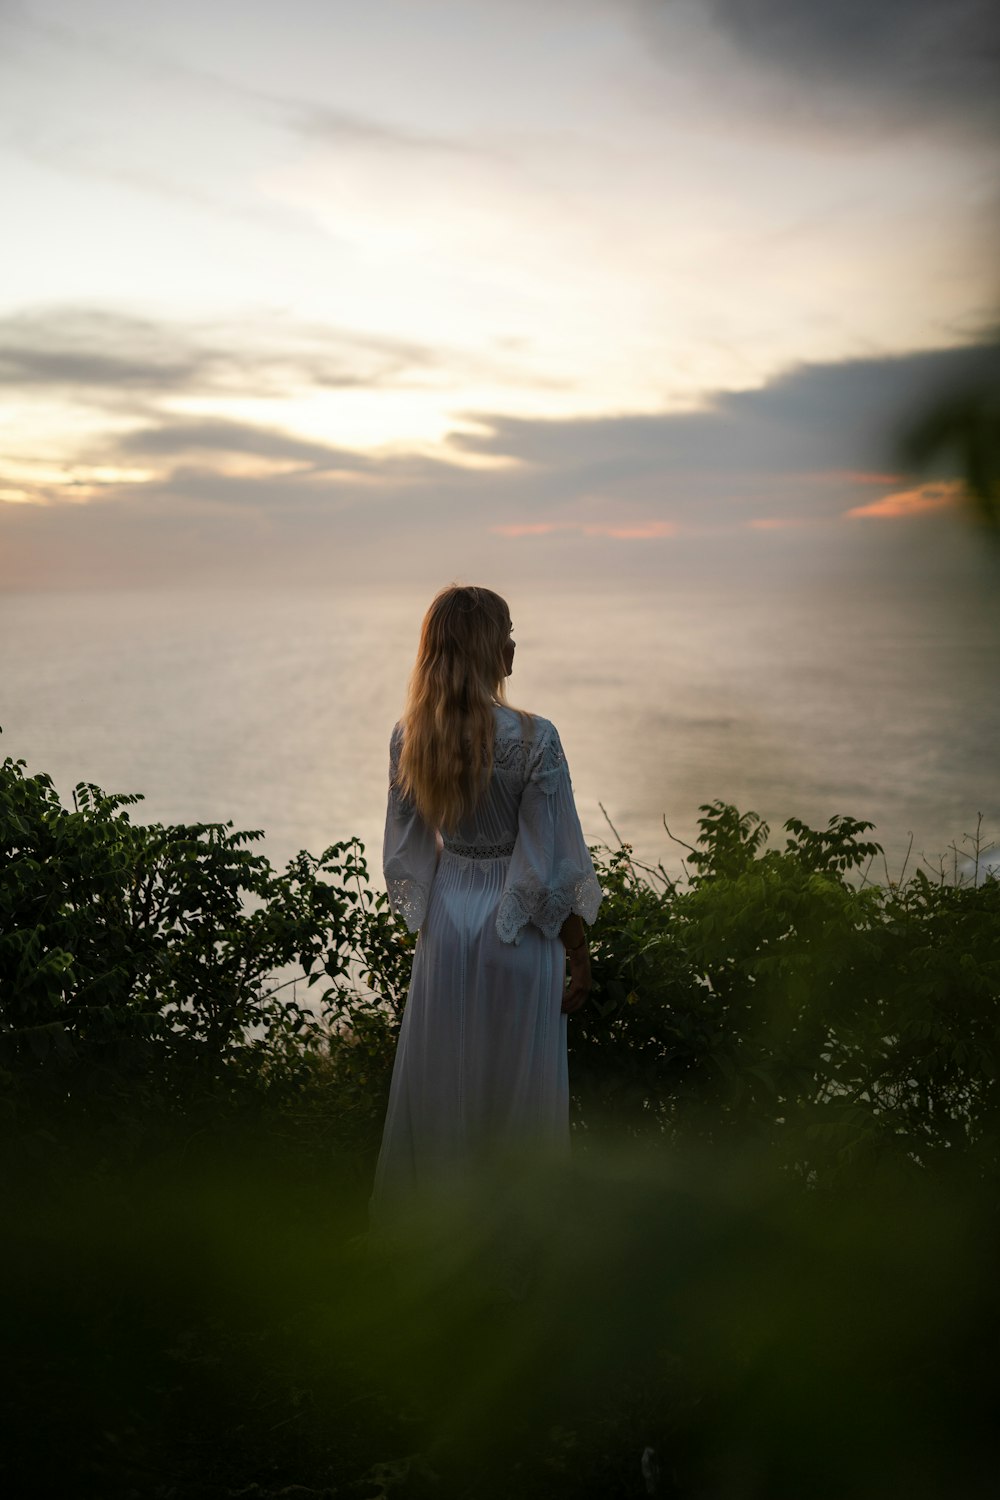 a person in a white dress standing in a field with trees and a sunset